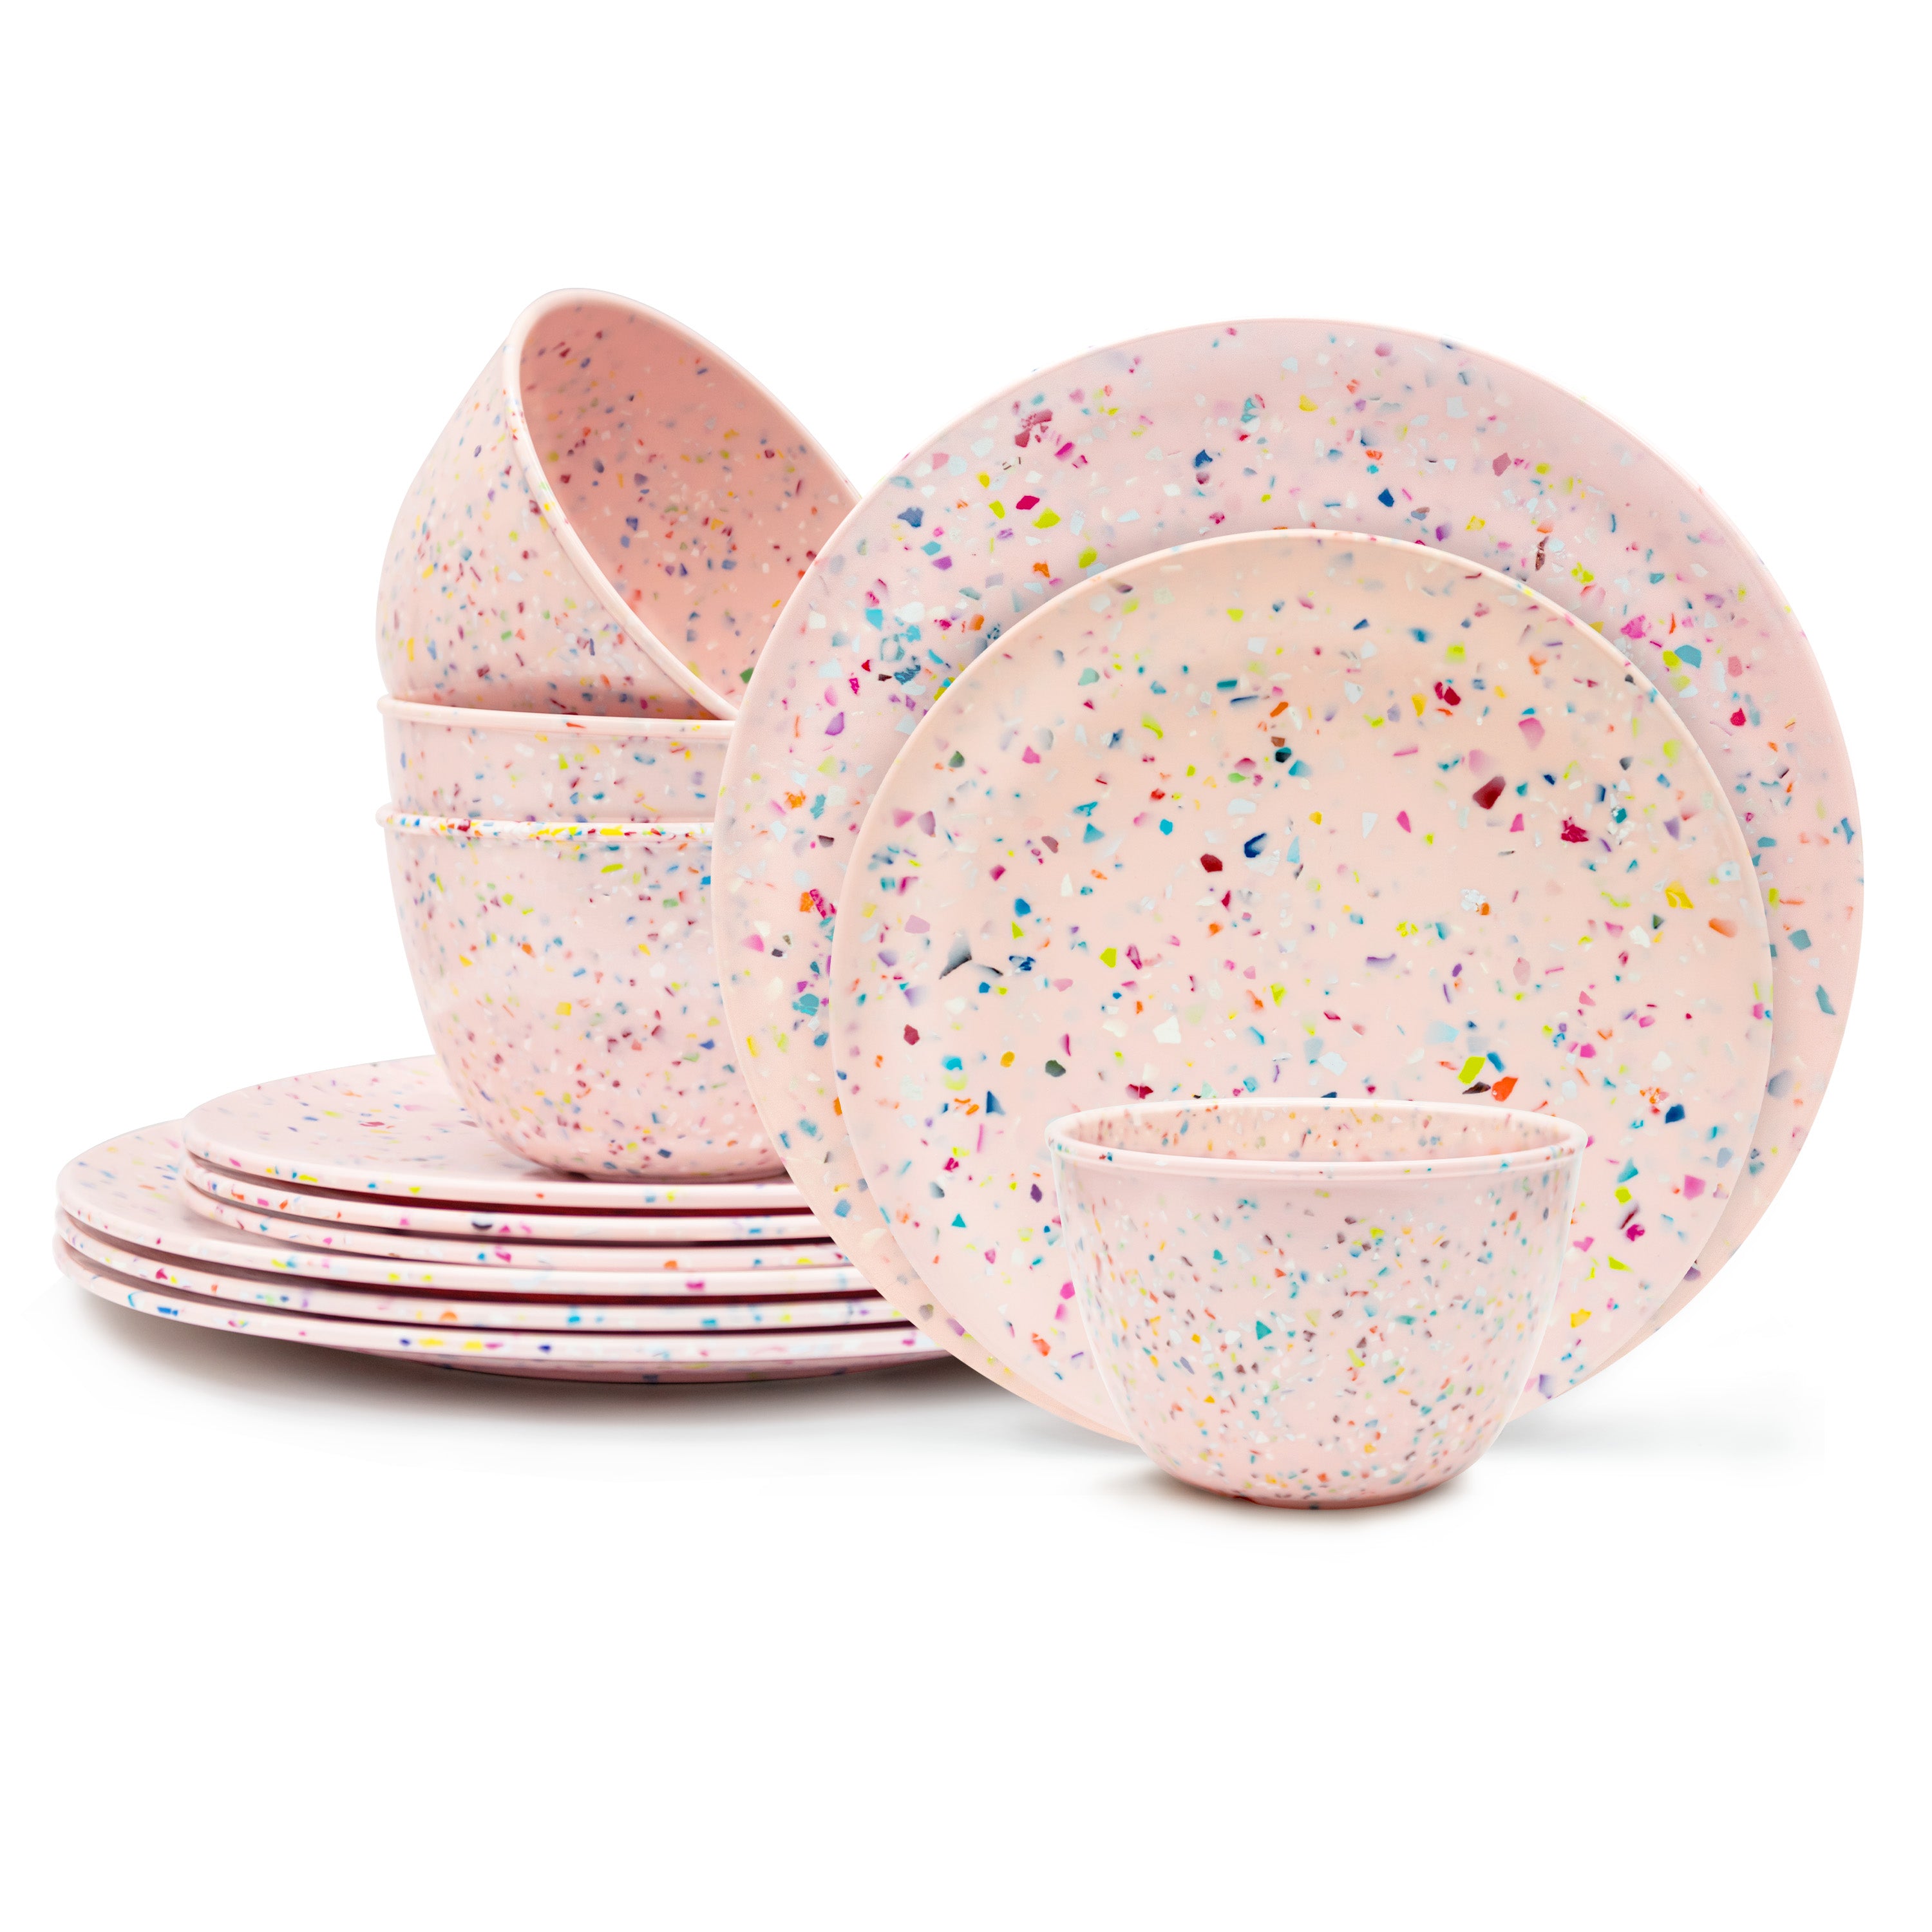 Confetti Melamine Dinnerware Set - Durable, Recycled Plates and